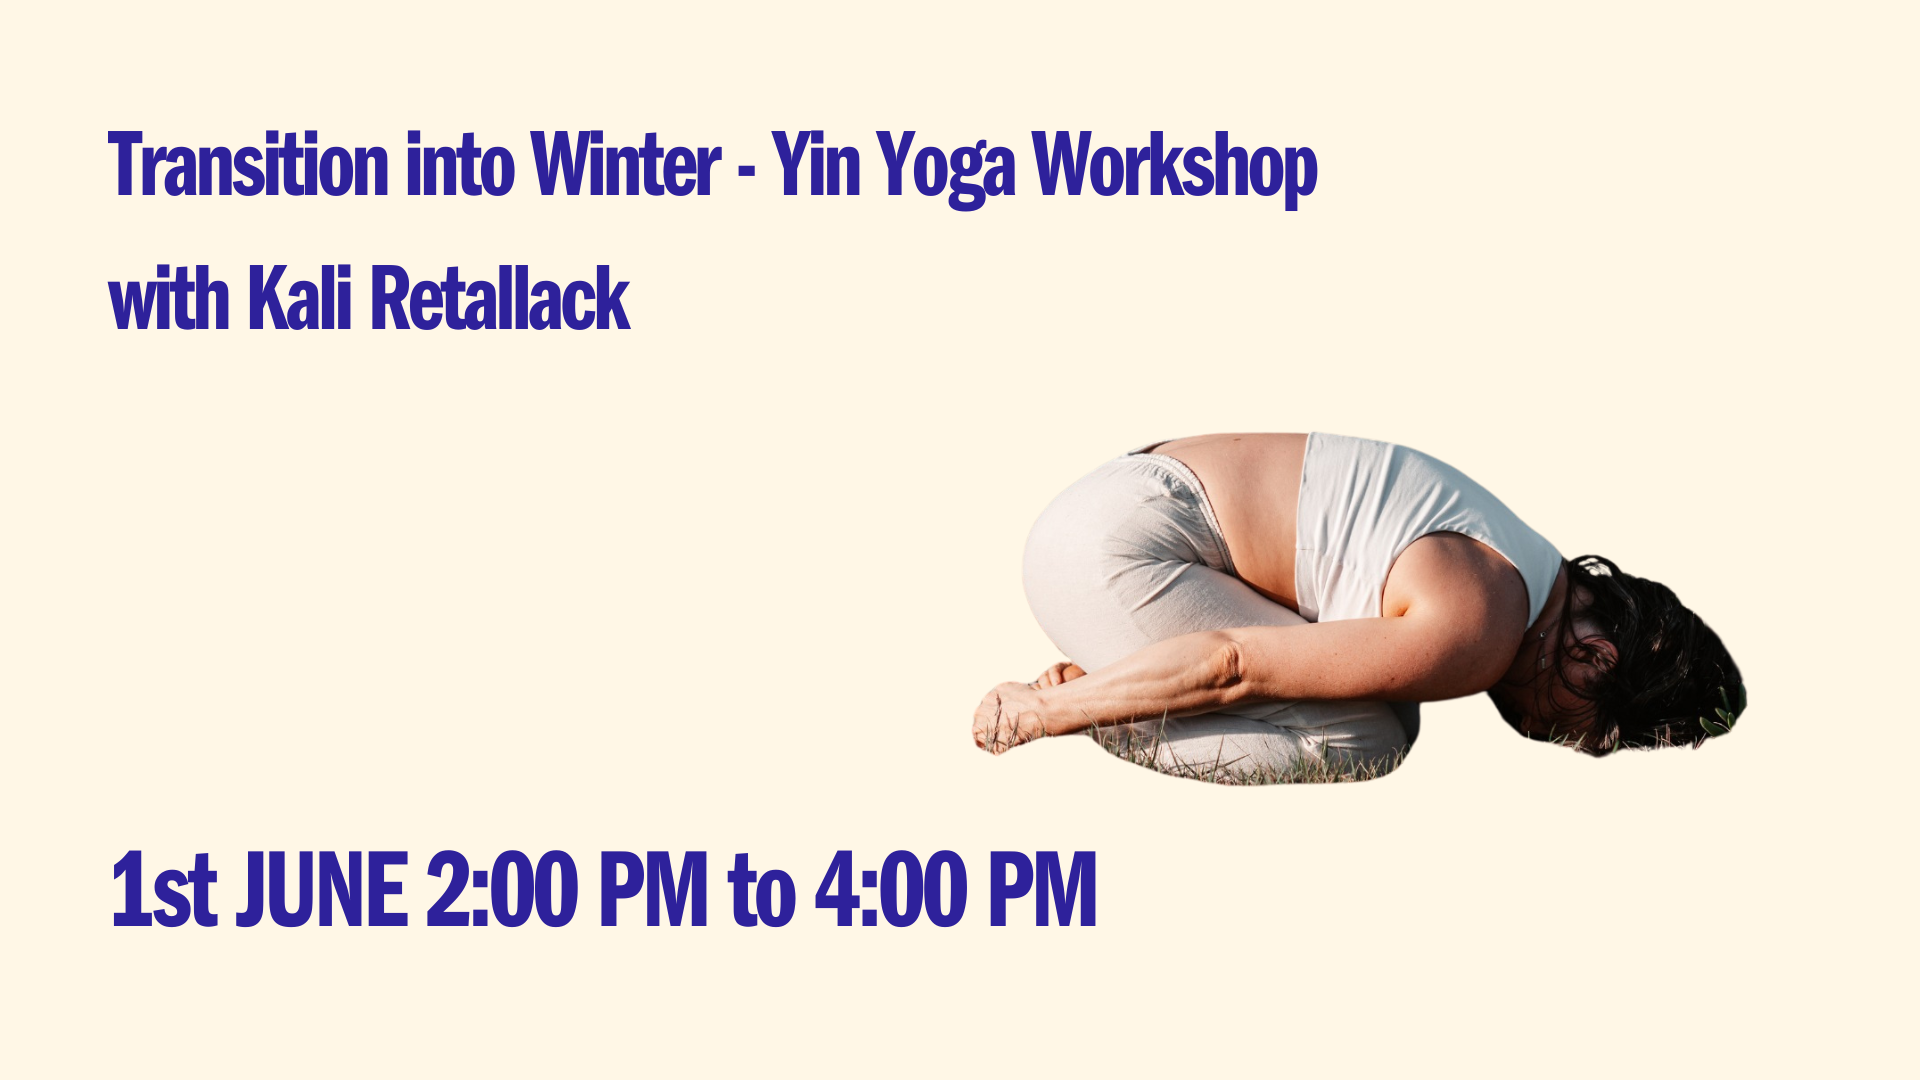 Transition into Winter - Yin Yoga Workshop with Kali | June 1st